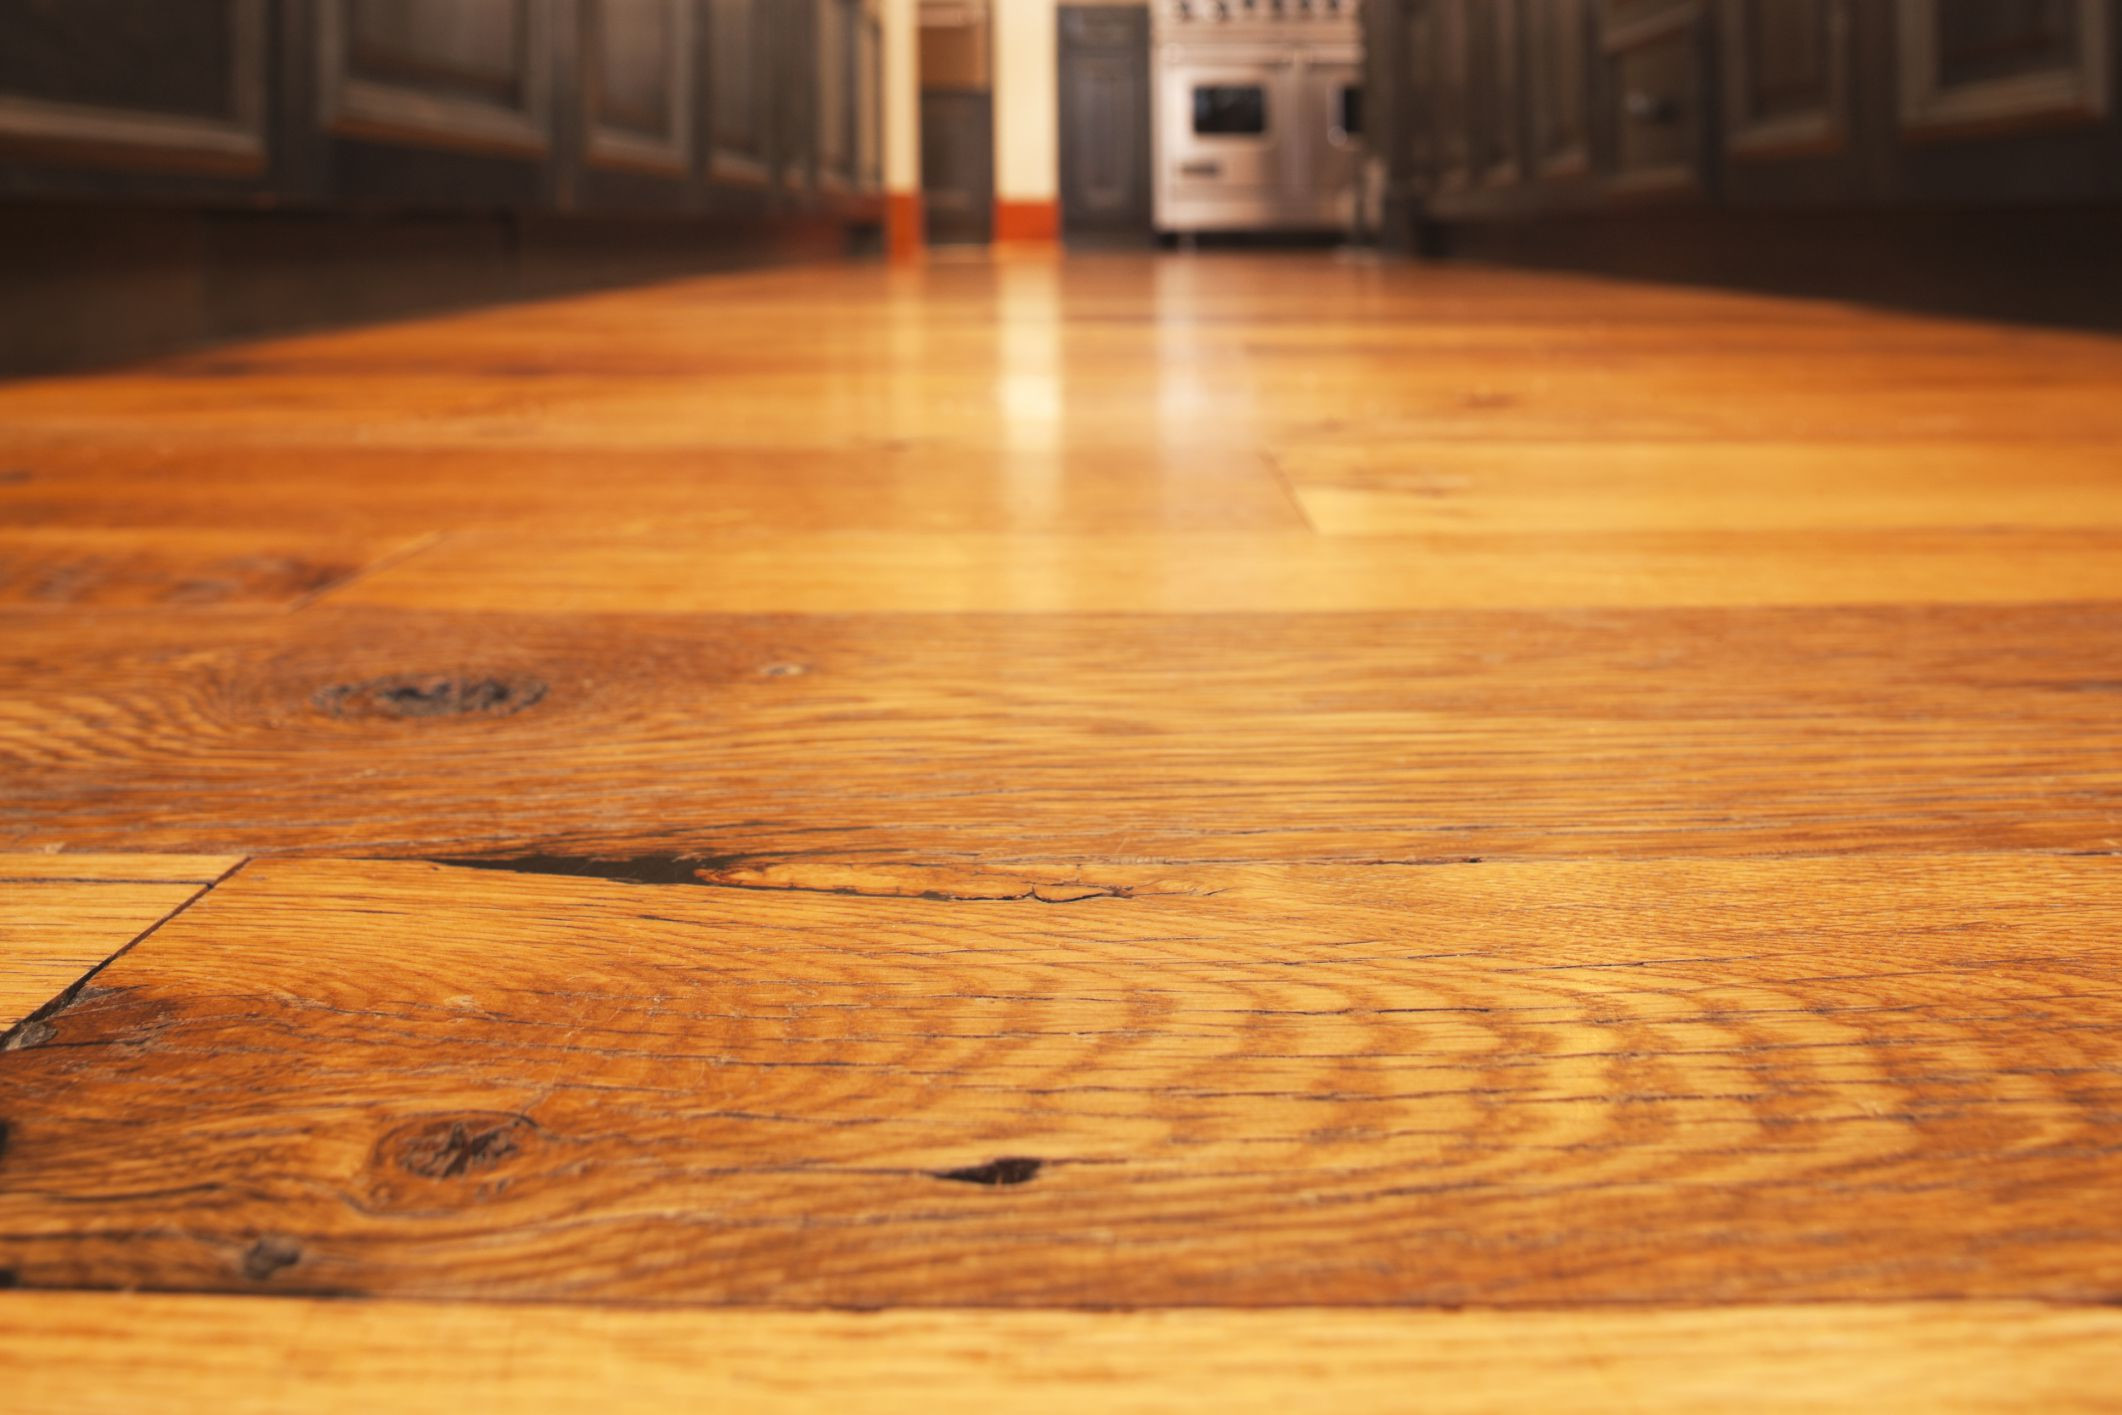 repairing gaps in old hardwood floors of why a microbevel is on your flooring inside wood floor closeup microbevel 56a4a13f5f9b58b7d0d7e5f4